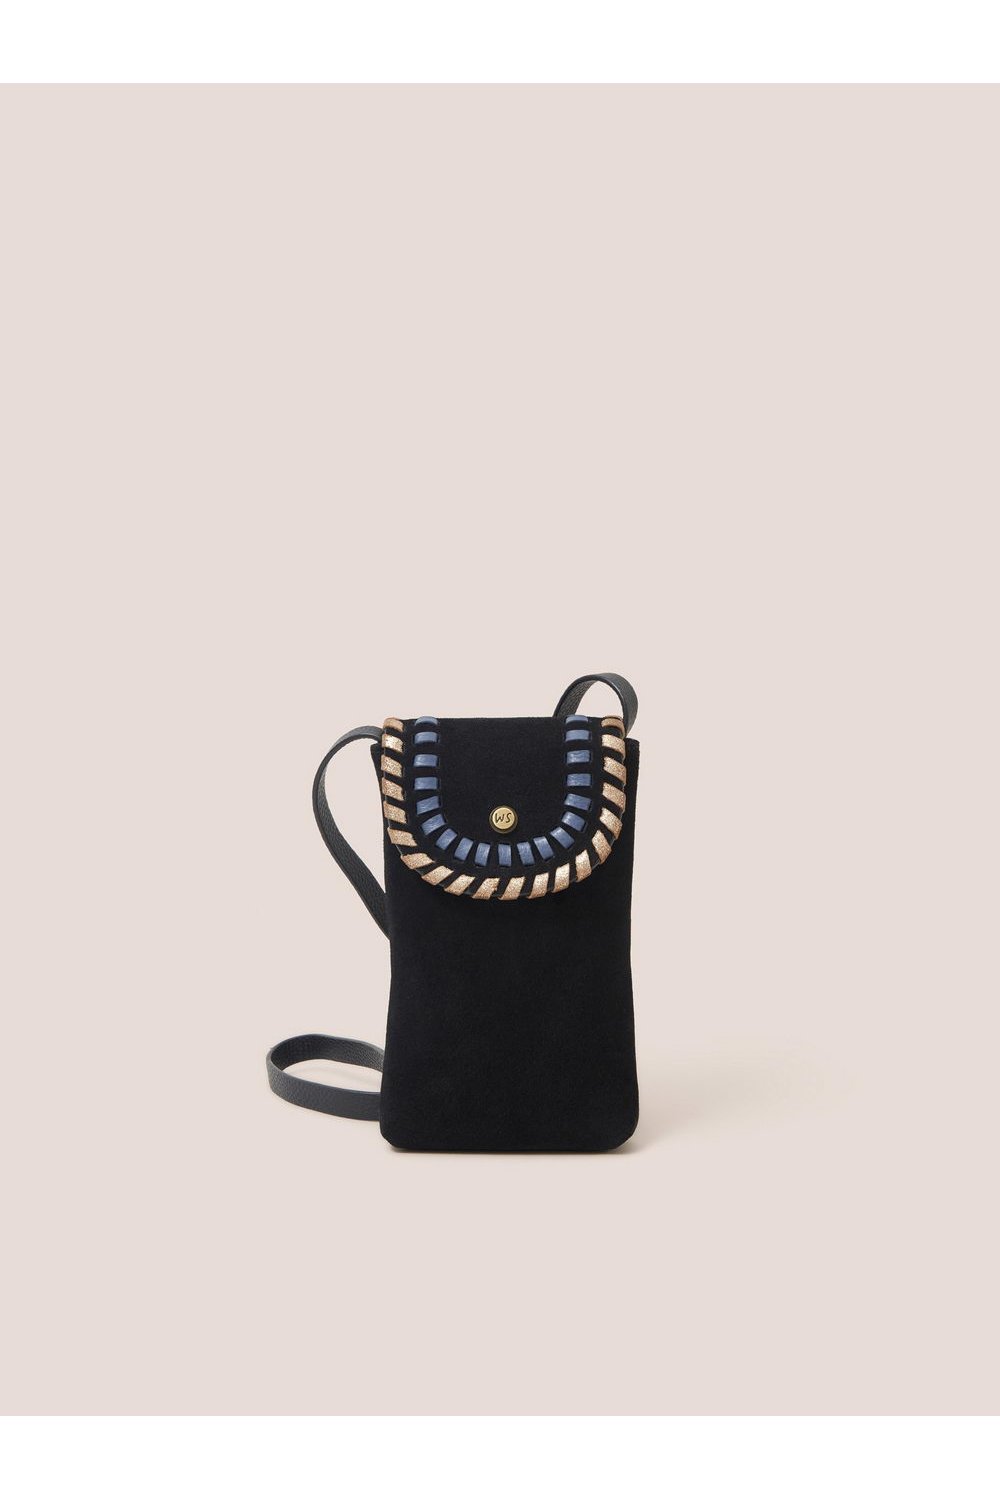 White Stuff Whipstitch Leather Phone bag in BLK MLT